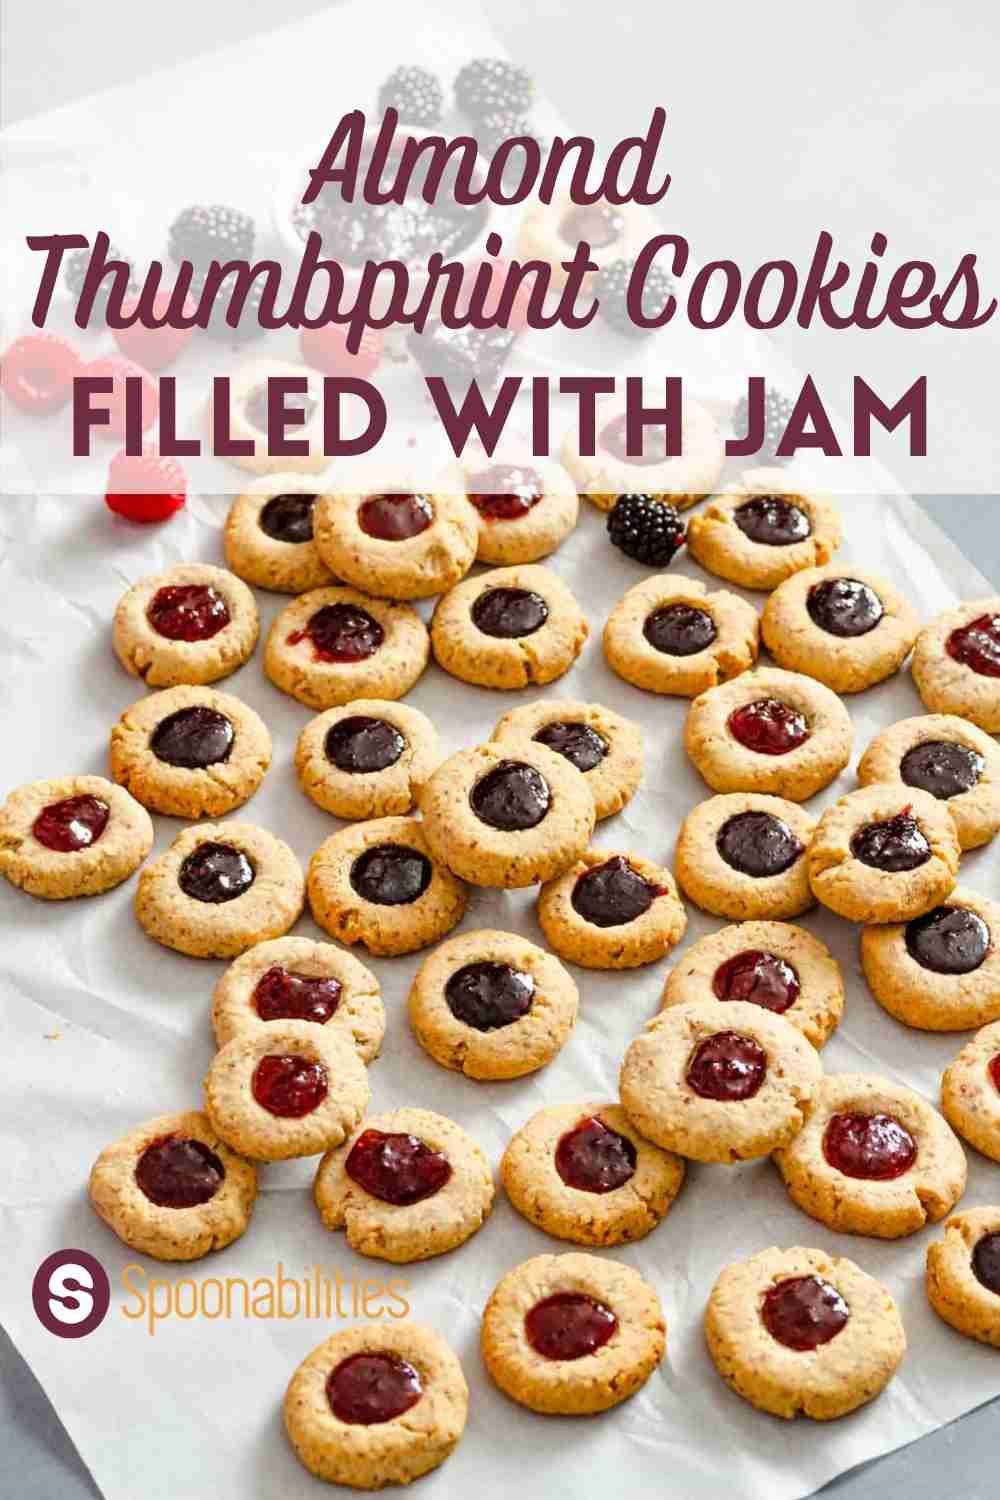 Almond Thumbprint Cookies filled with Jam